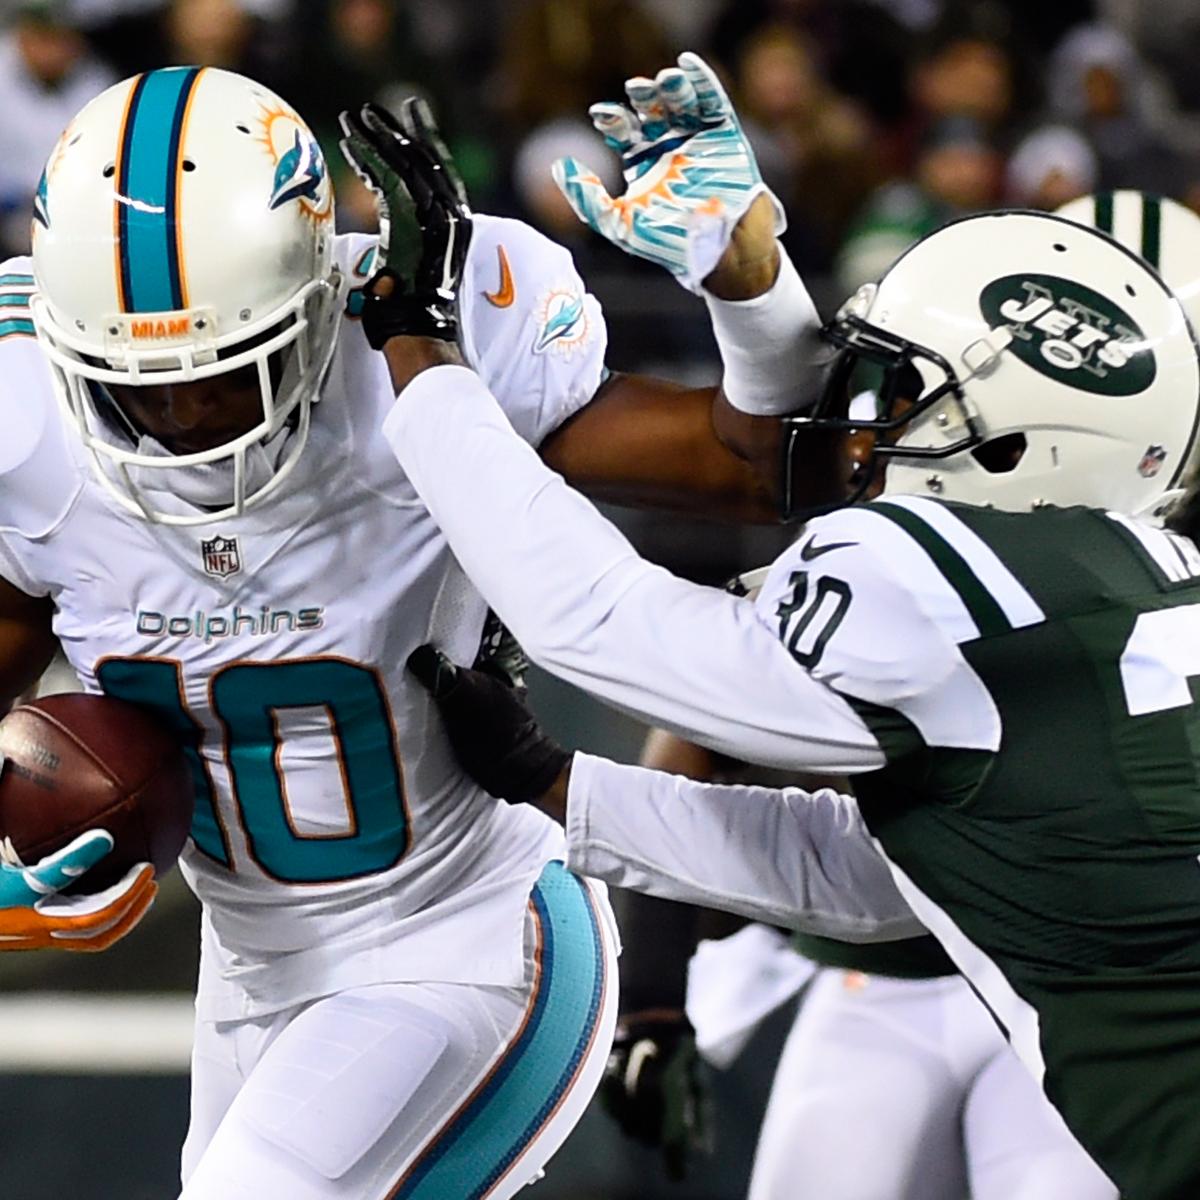 New York Jets vs. Miami Dolphins Live New York Score and Analysis